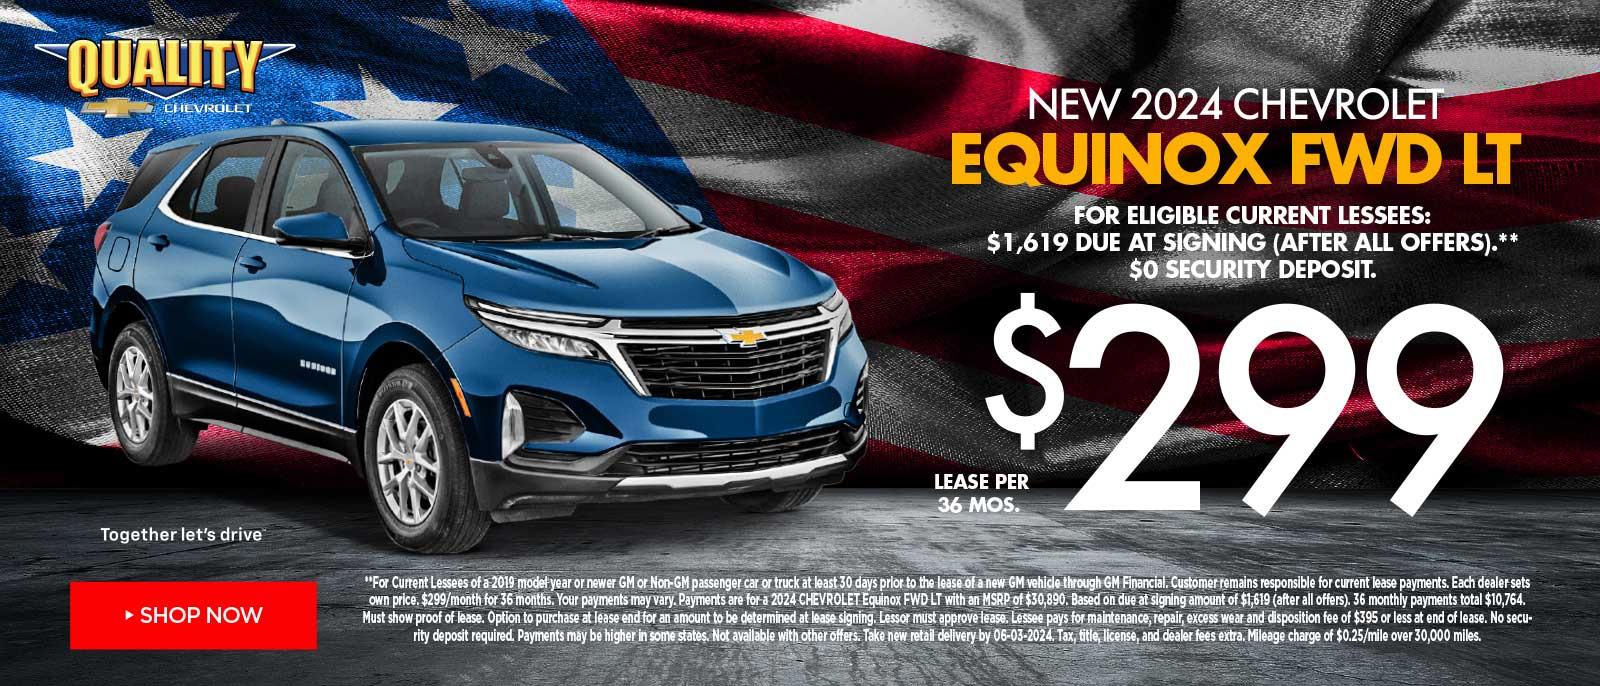 New 2024 Chevrolet Equinox FWD LT $299/36 Month Lease